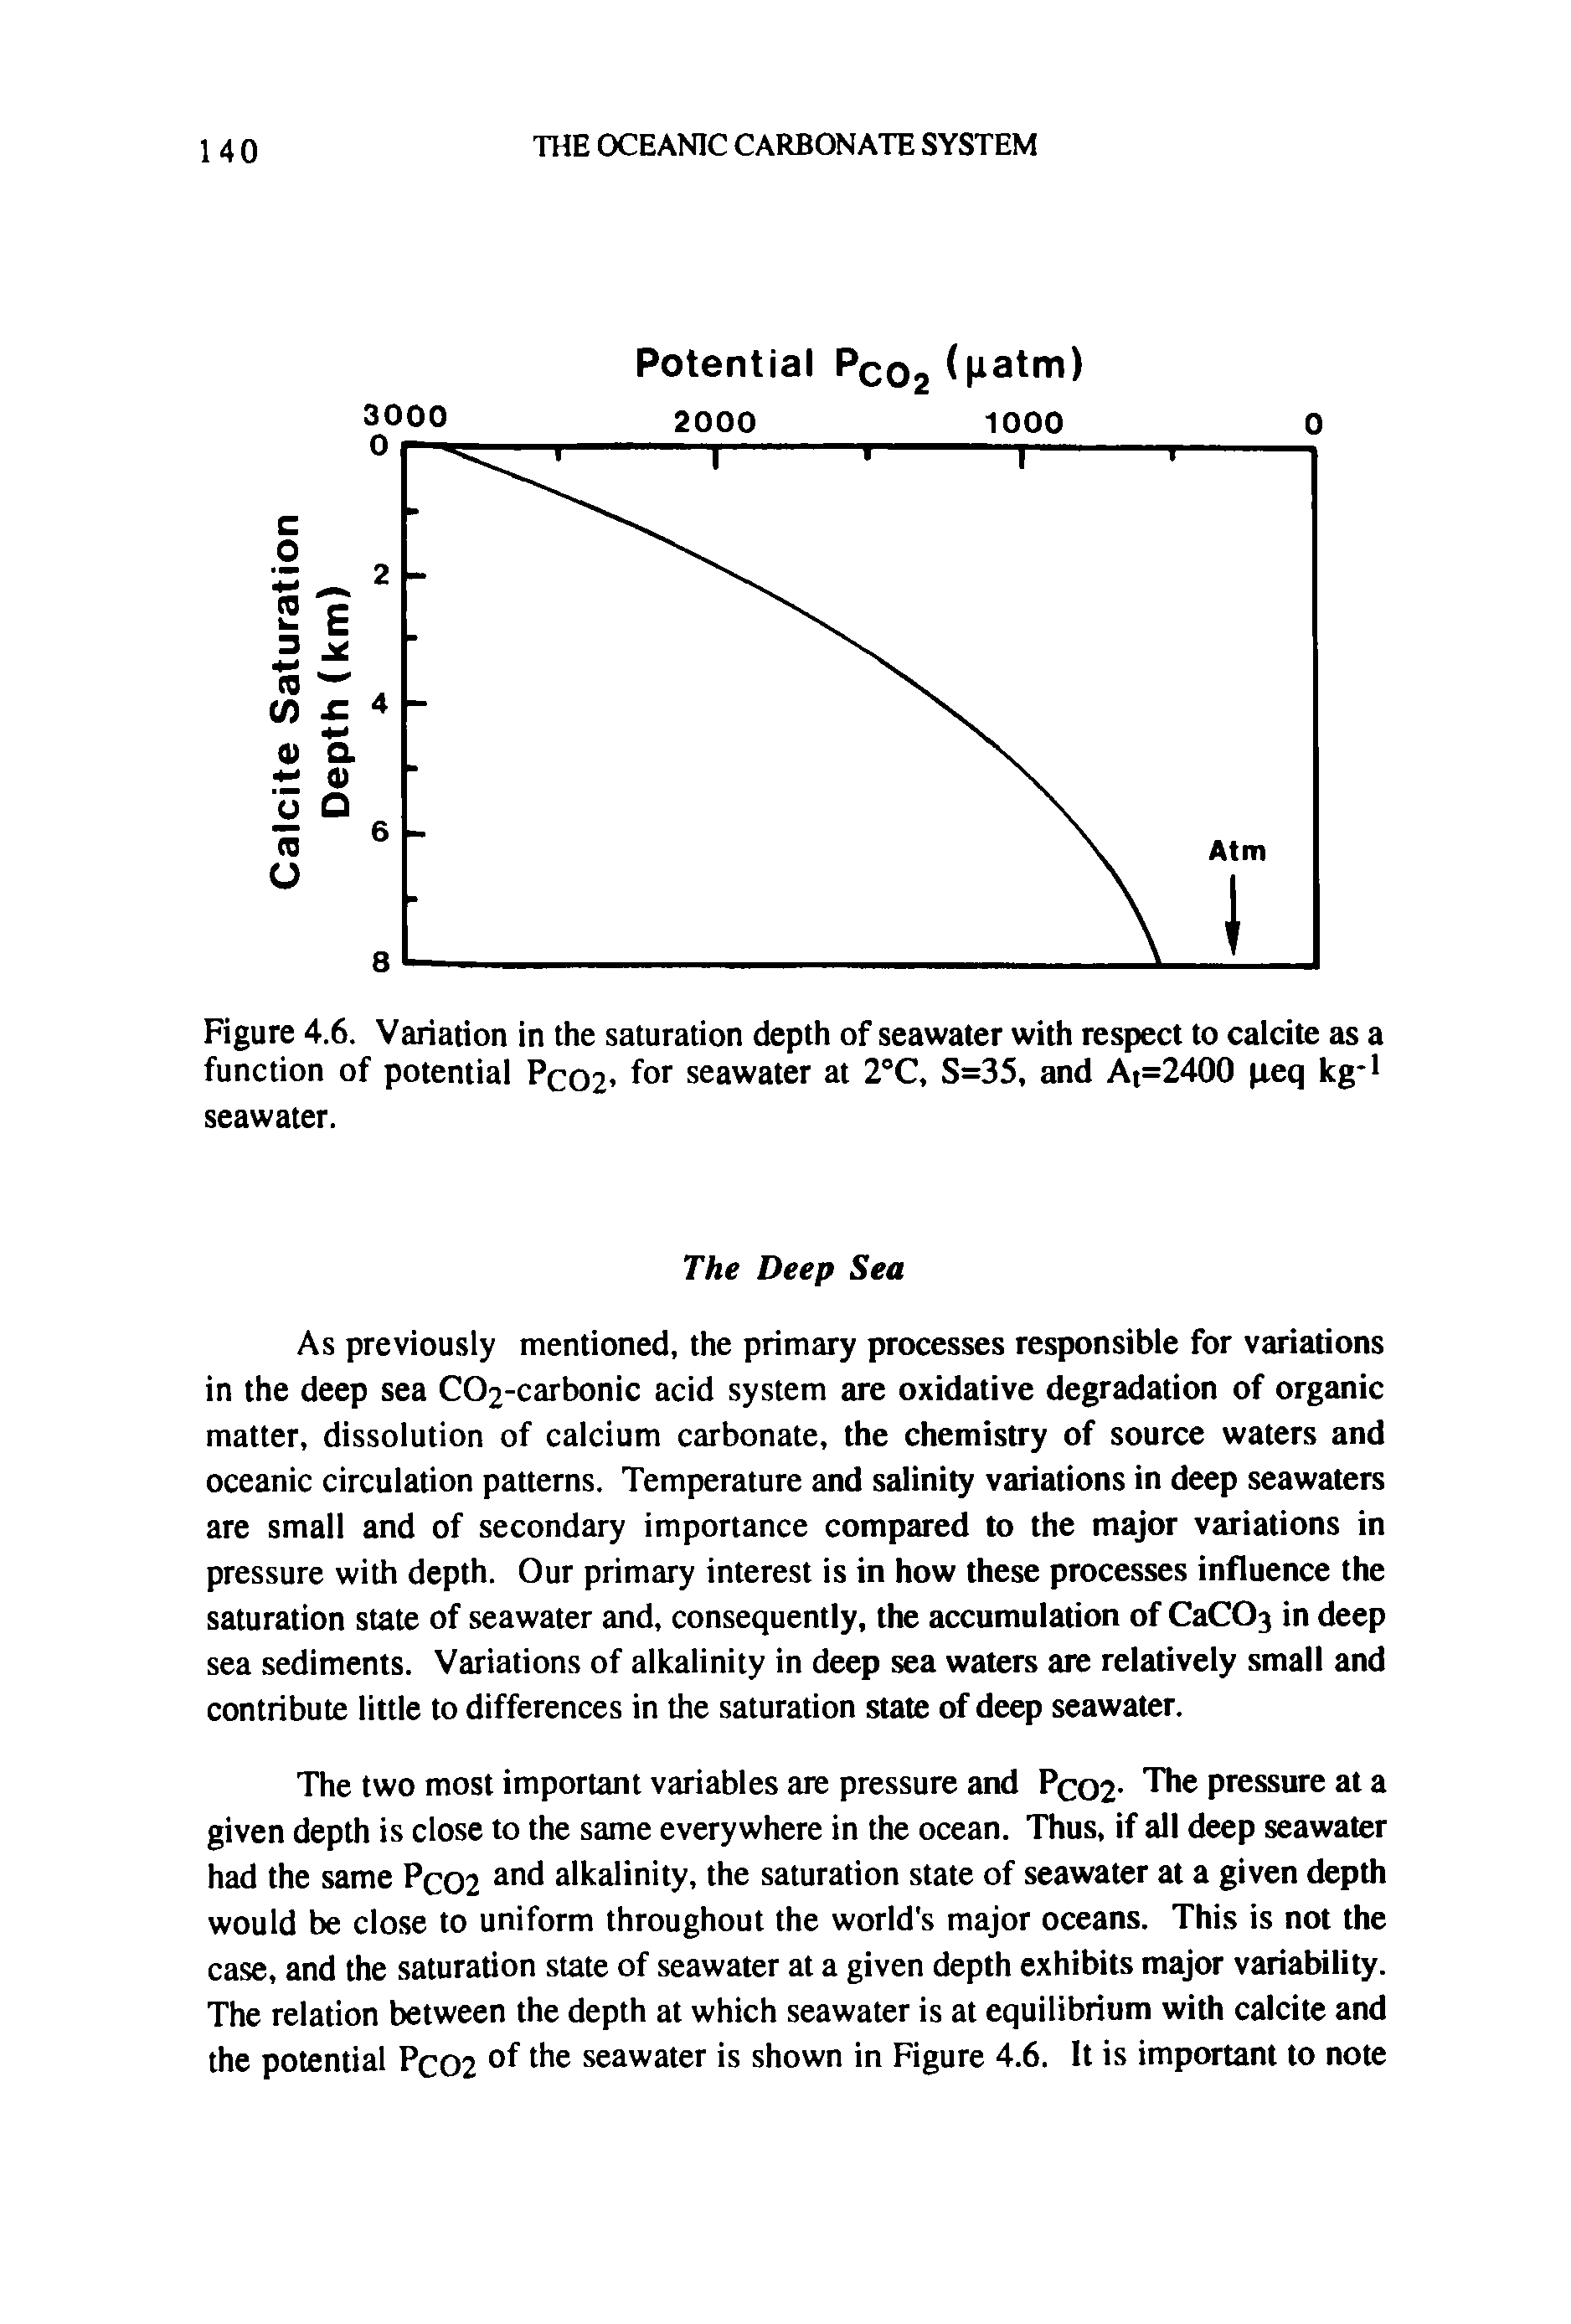 Figure 4.6. Variation in the saturation depth of seawater with respect to calcite as a function of potential Pc02 f°r seawater at 2°C, S=35, and At=2400 ieq kg-1 seawater.